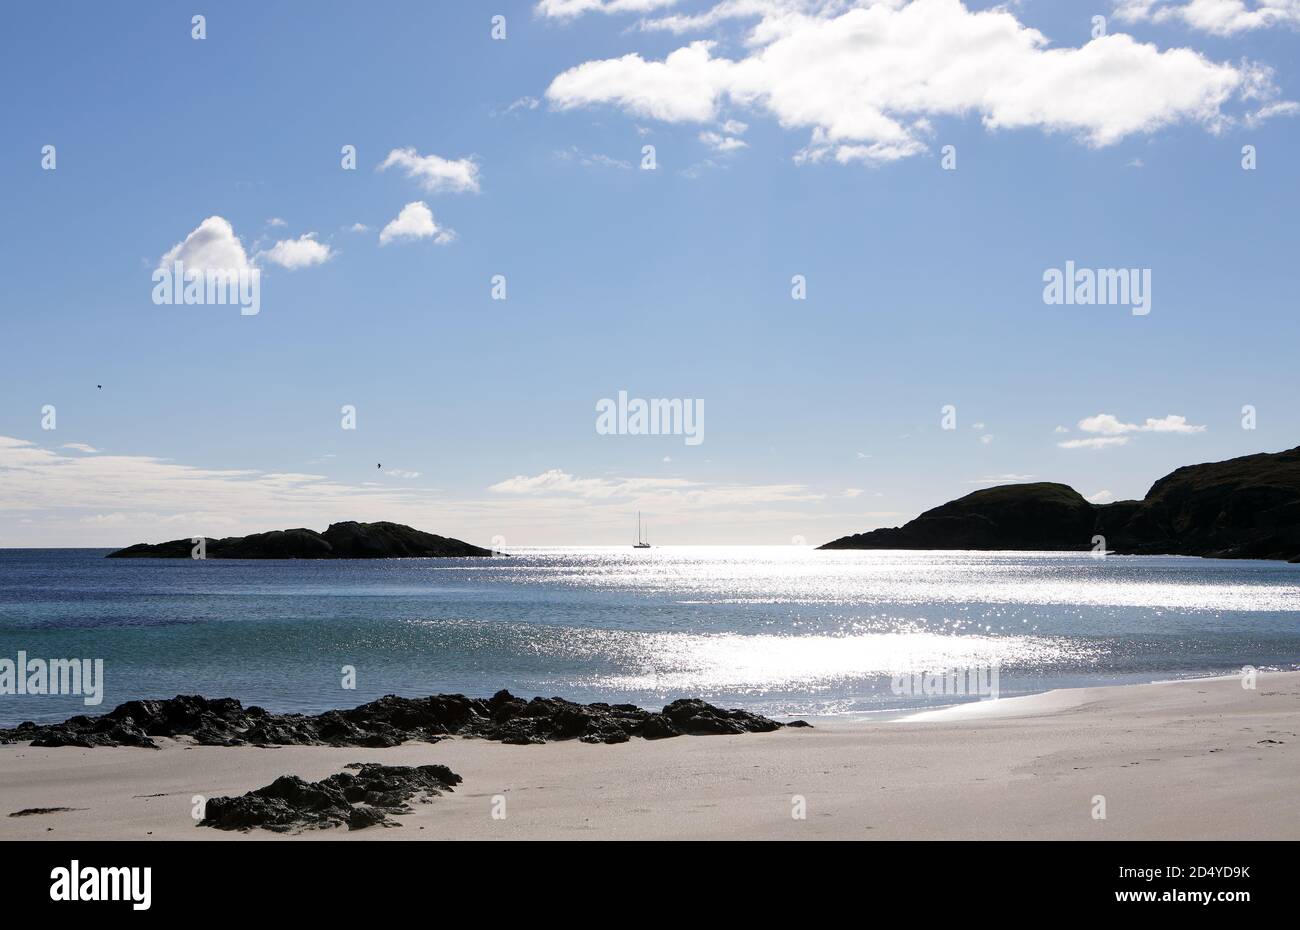 Yacht passing Scoor beach, a secluded sandy beach, on the Ross of Mull, Isle of Mull, Scotland UK Stock Photo